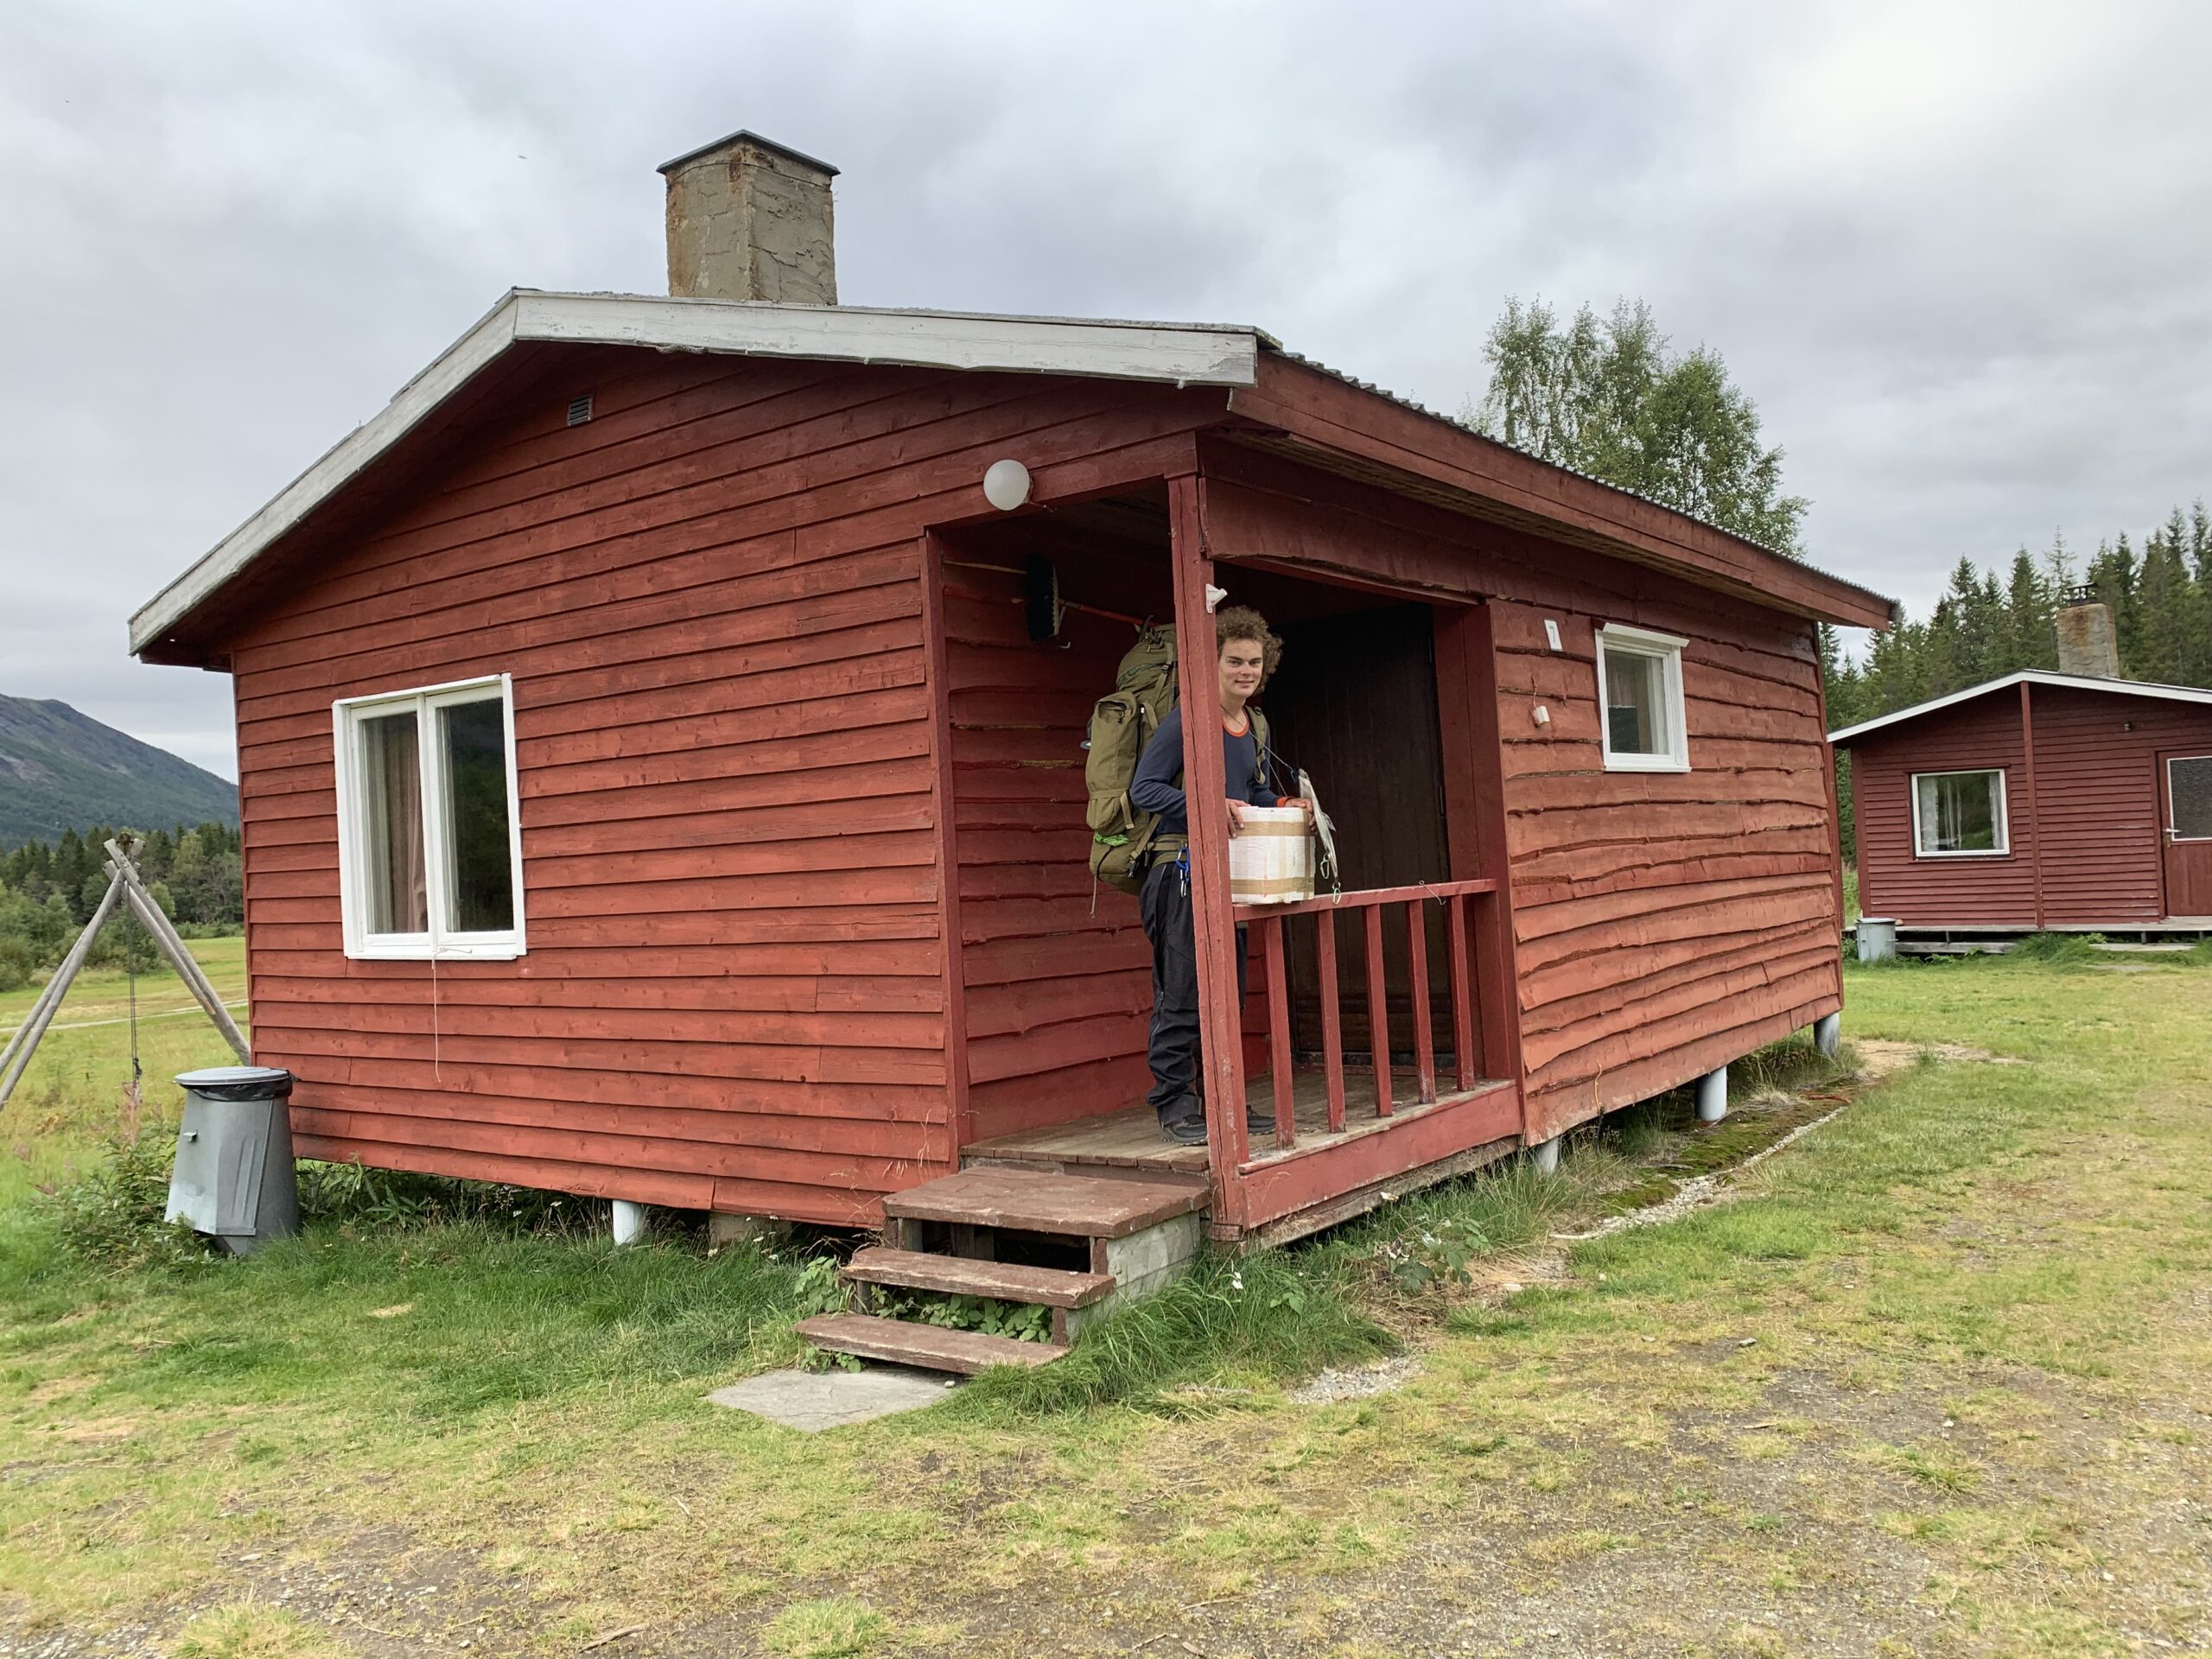 Read more about the article Day 122 – Ned til Grannes camping (Down to Grannes camping)